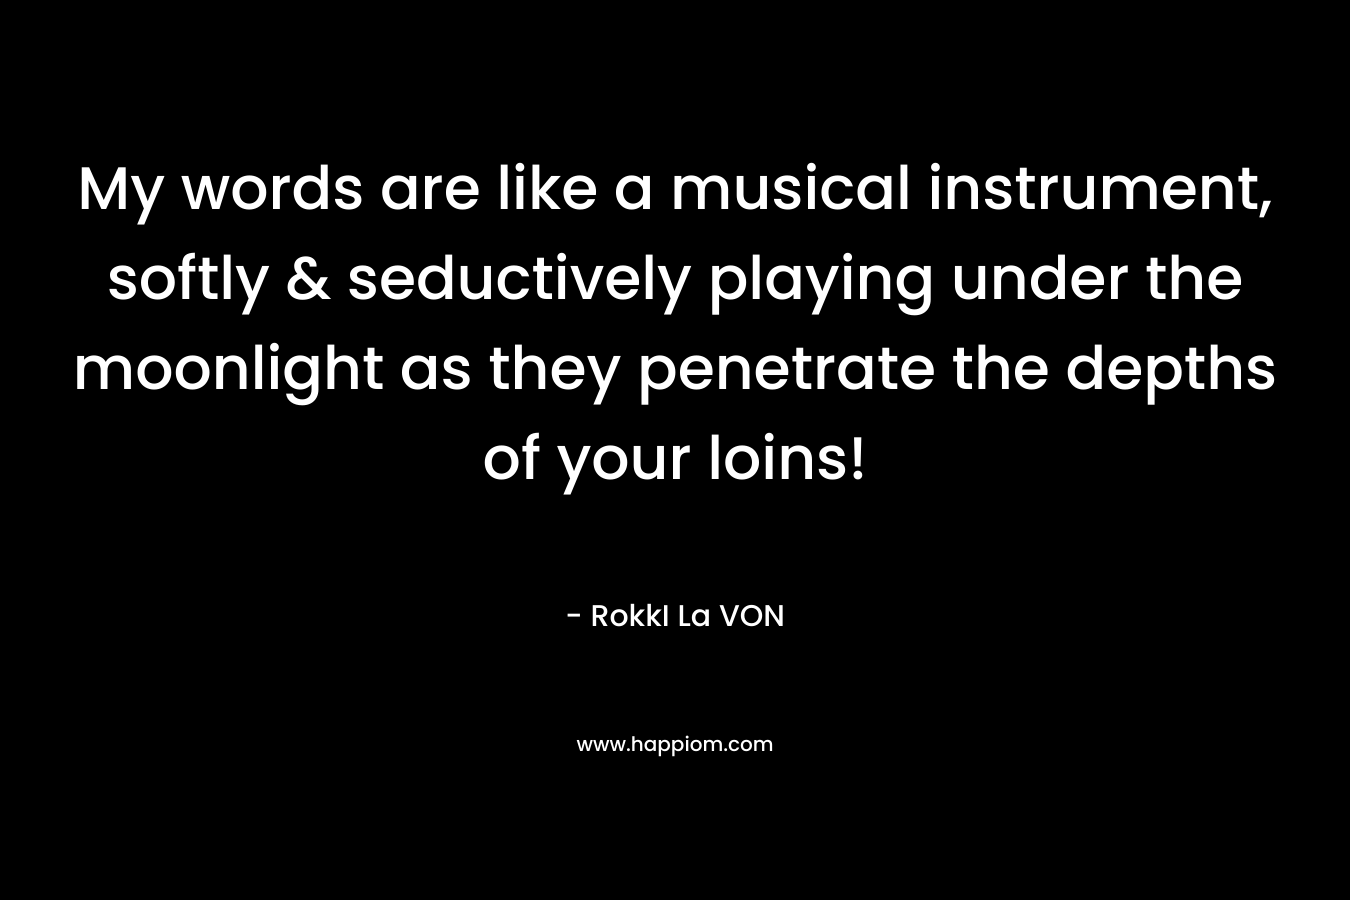 My words are like a musical instrument, softly & seductively playing under the moonlight as they penetrate the depths of your loins!